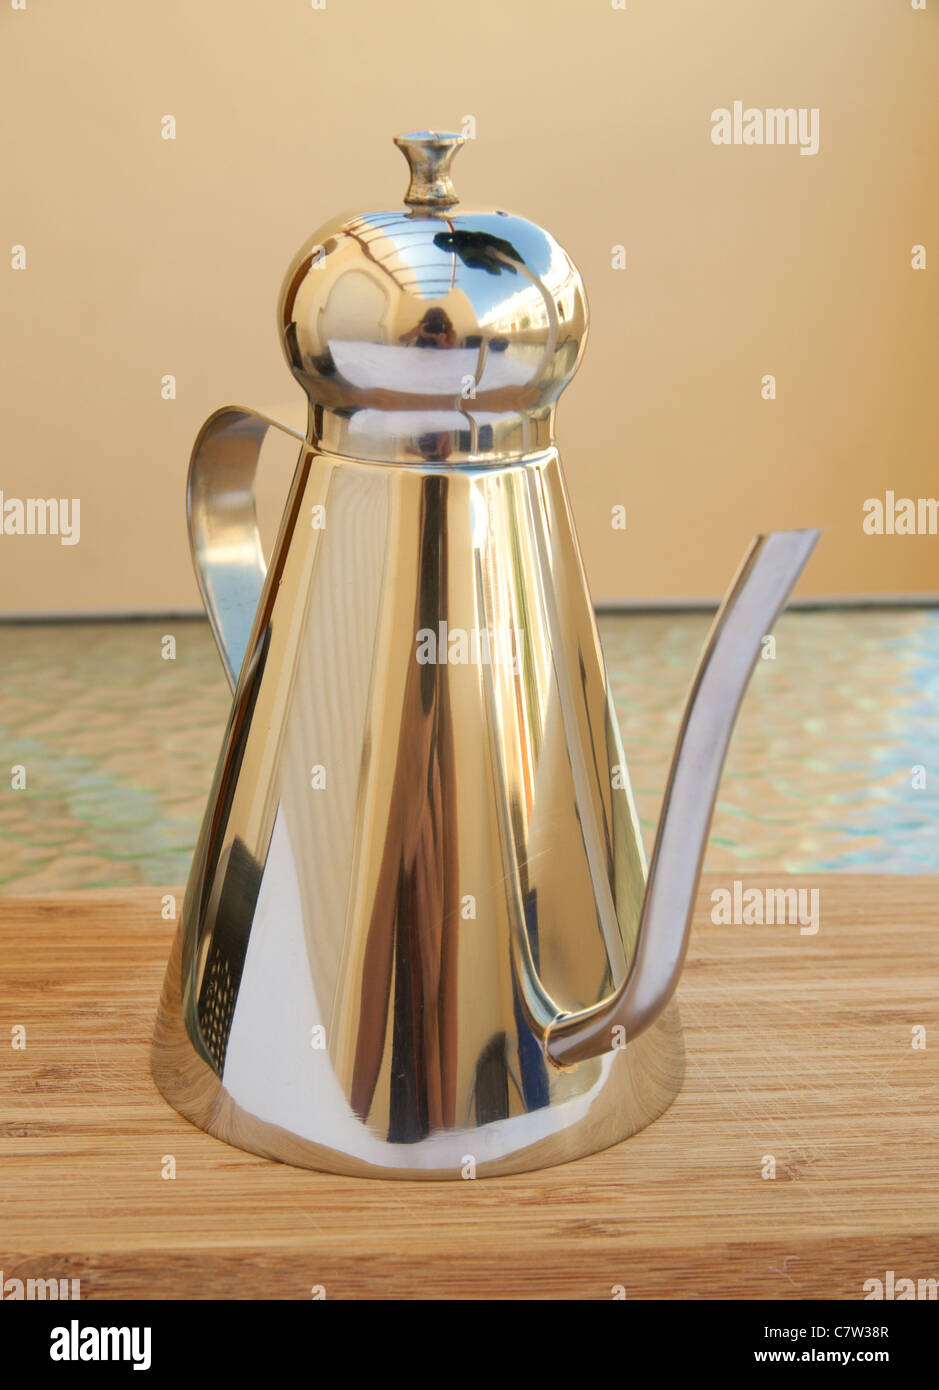 stainless steel vessel for olive oil Stock Photo